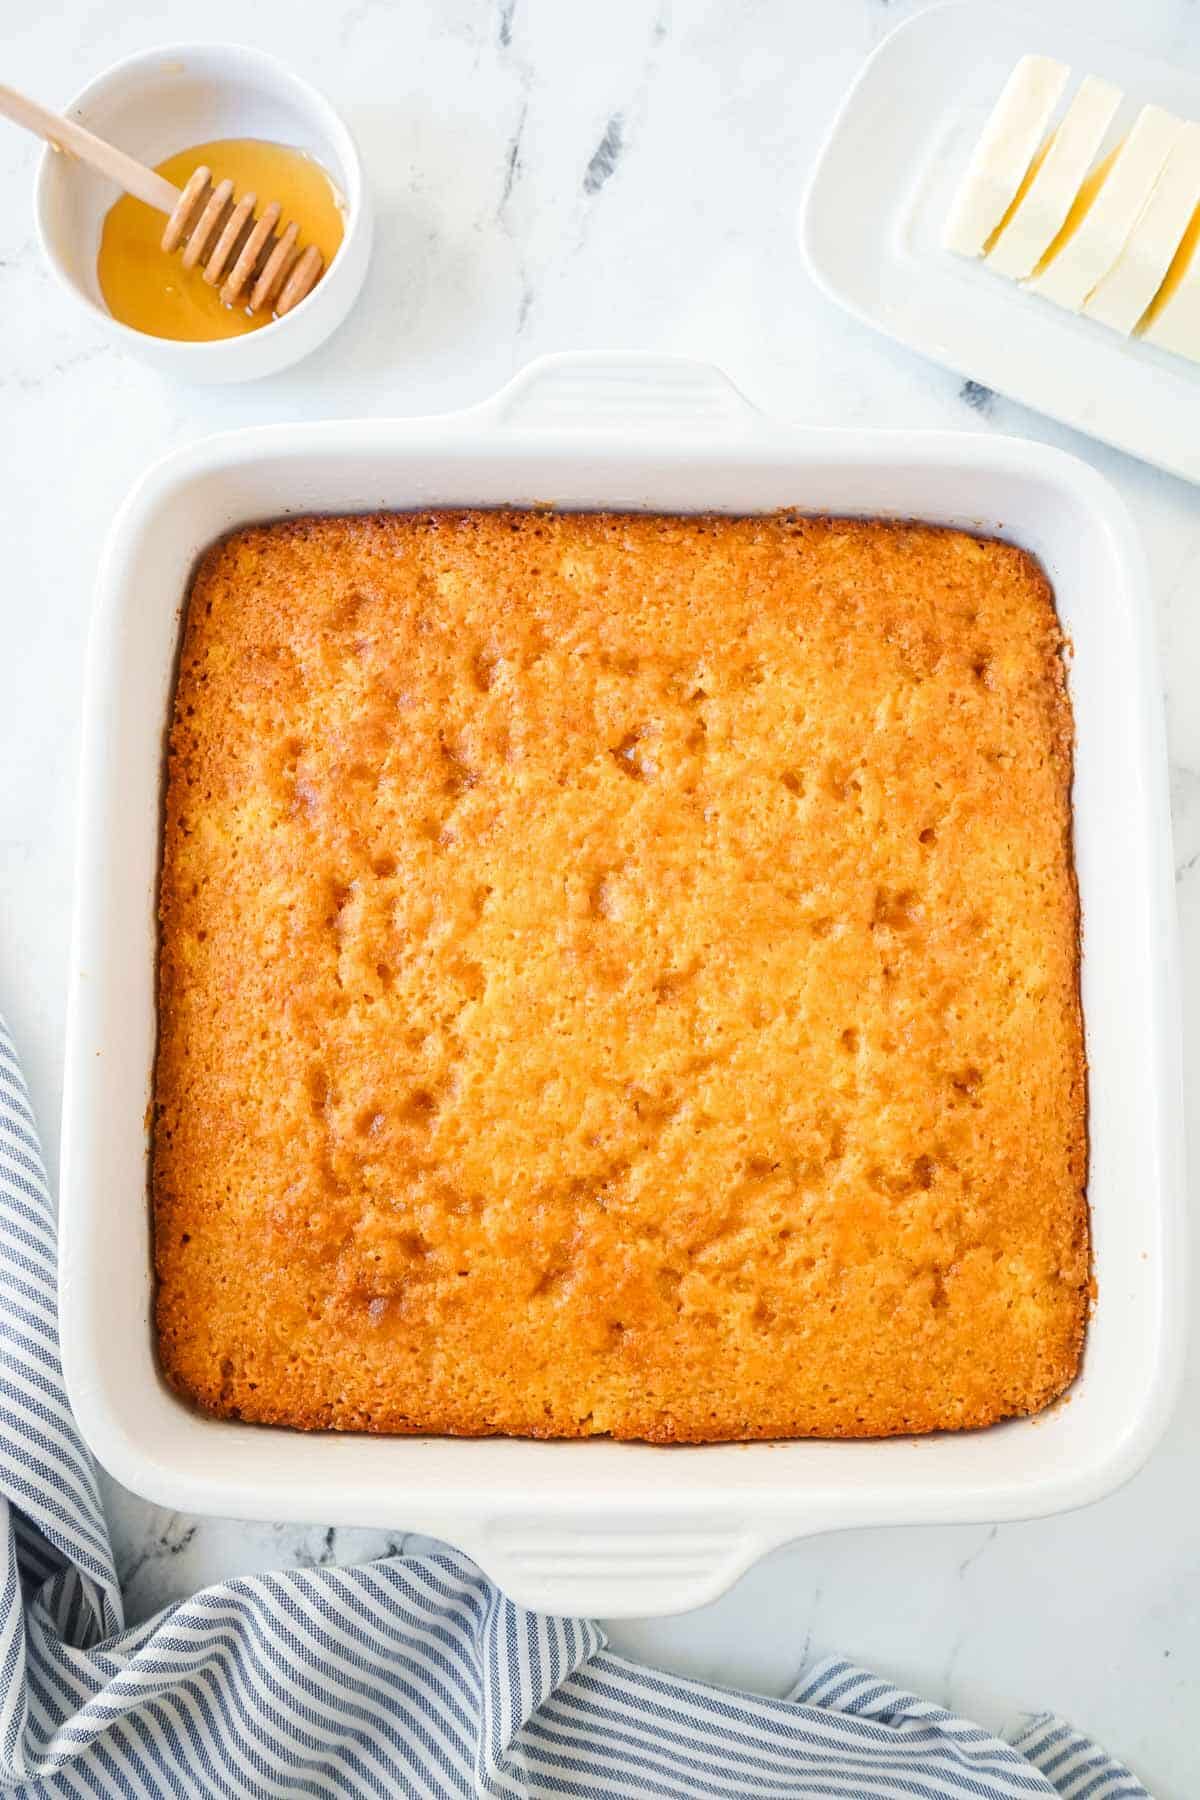 Sweet Jiffy cornbread in a white baking dish after being baked.